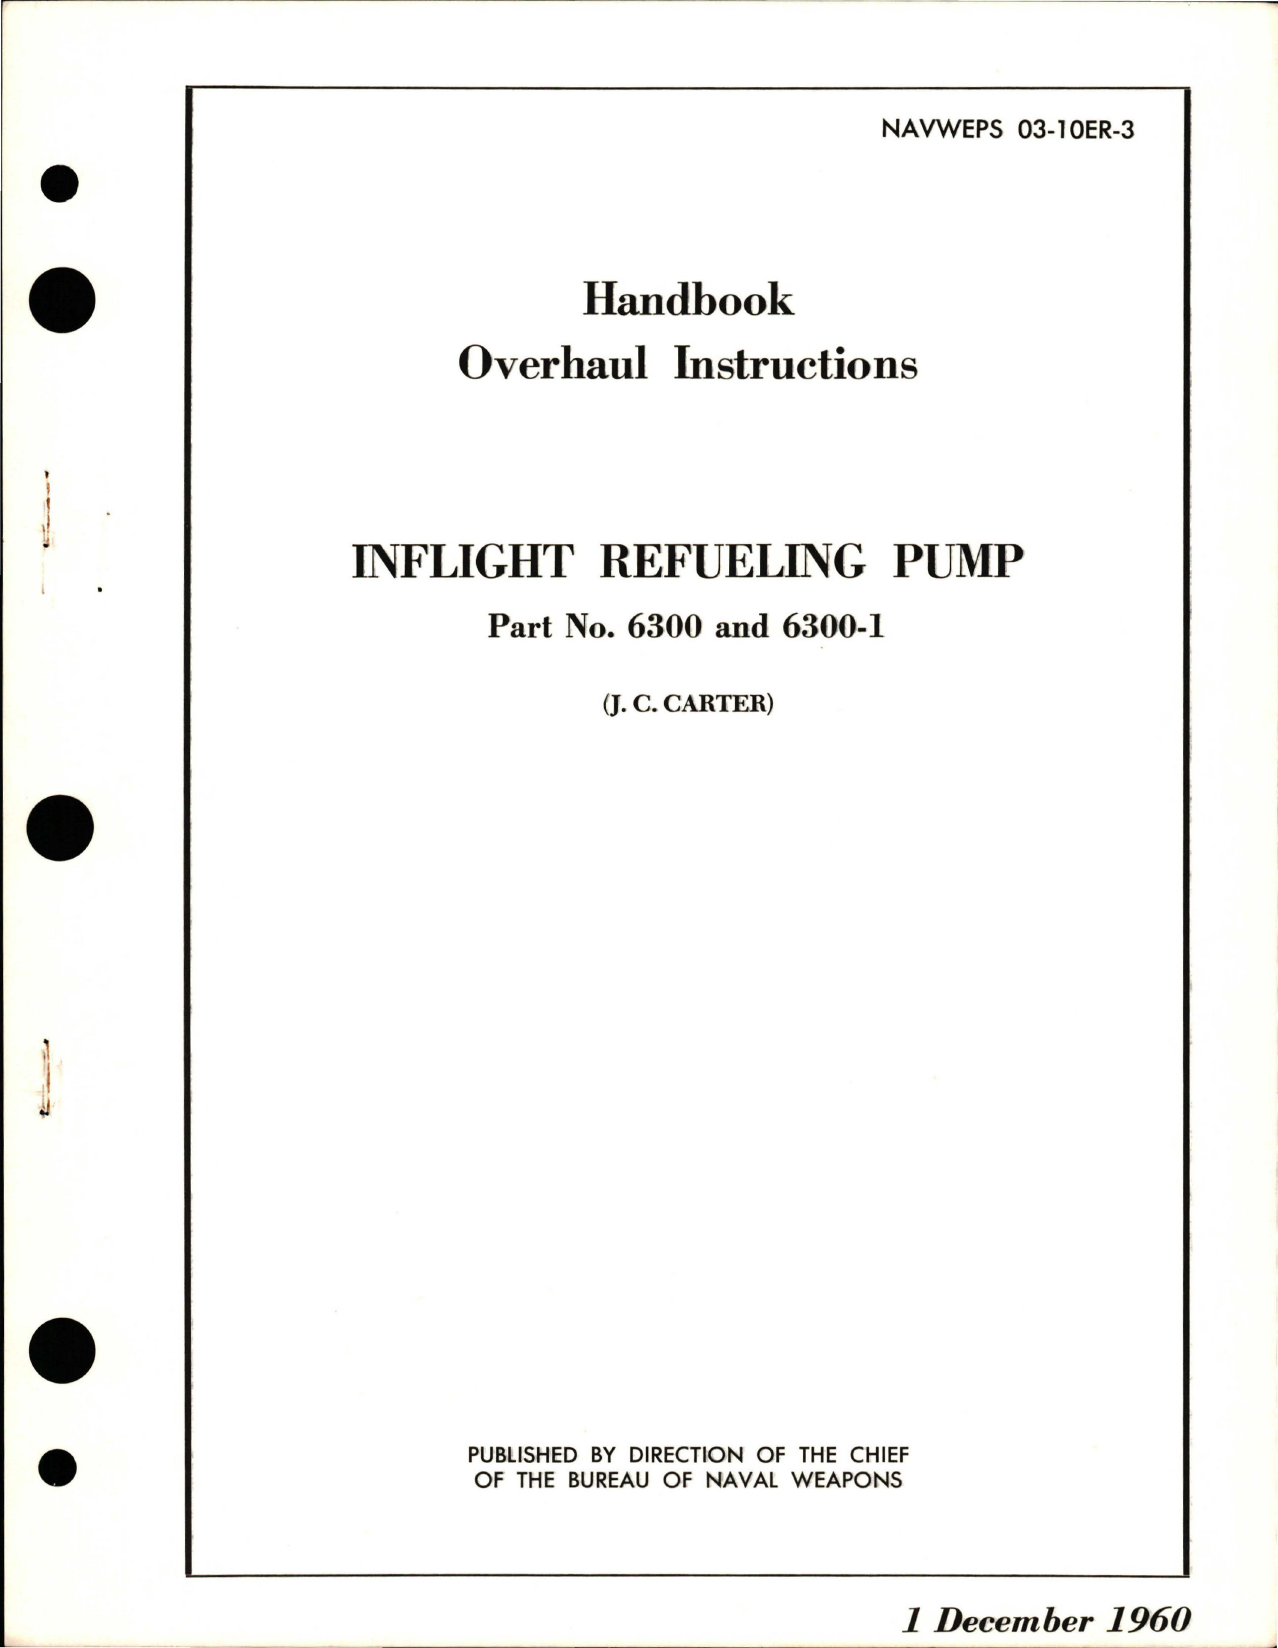 Sample page 1 from AirCorps Library document: Overhaul Instructions for Inflight Refueling Pump - Part 6300 and 6300-1 